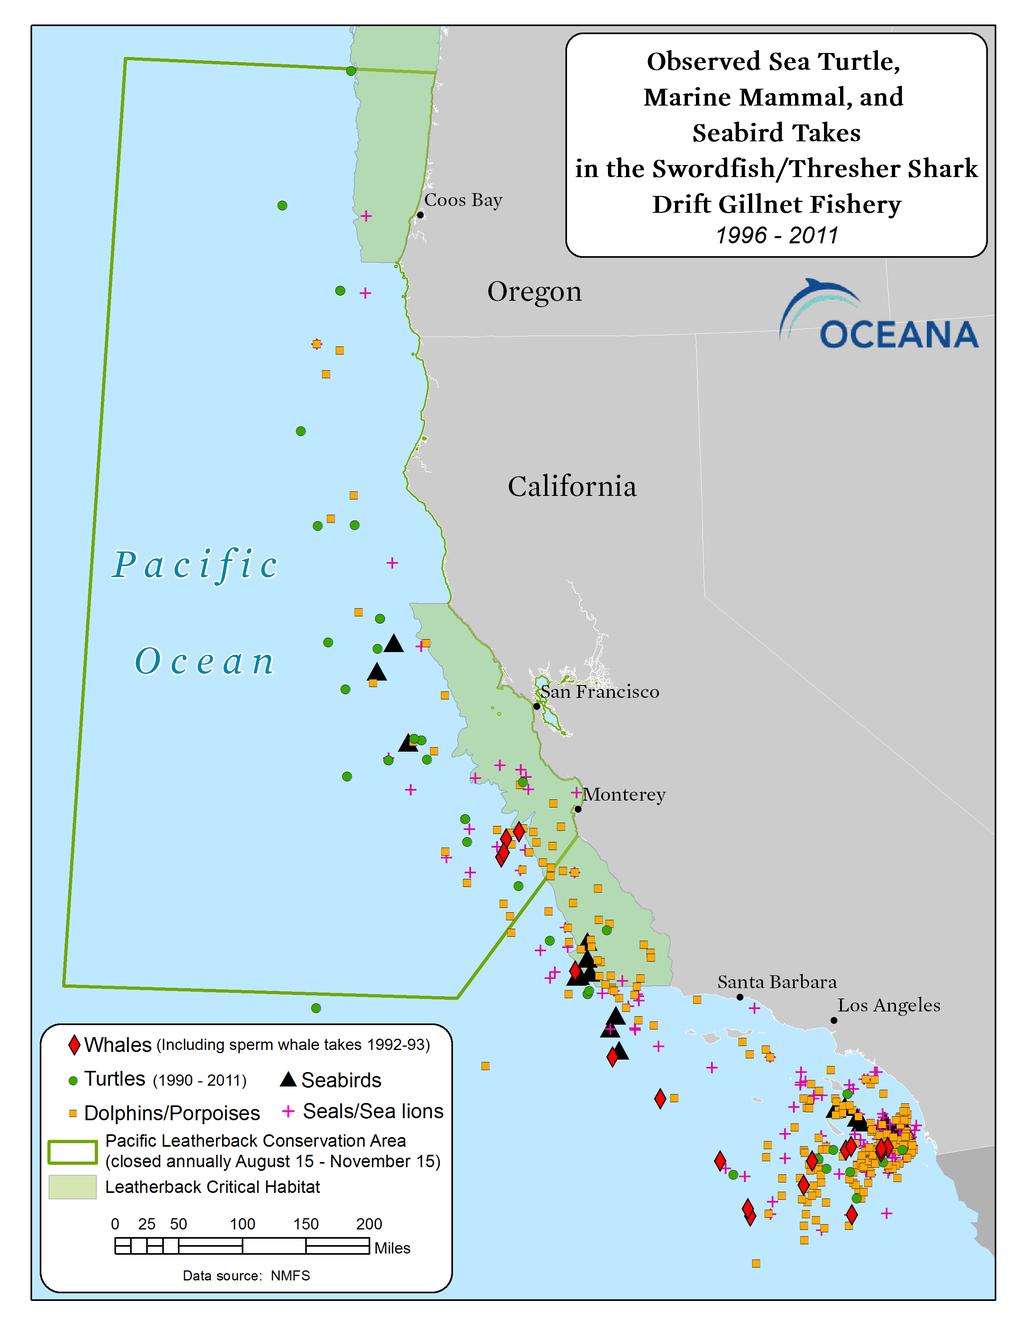 Check out Oceana s interactive map of this data: http://www.oceana.